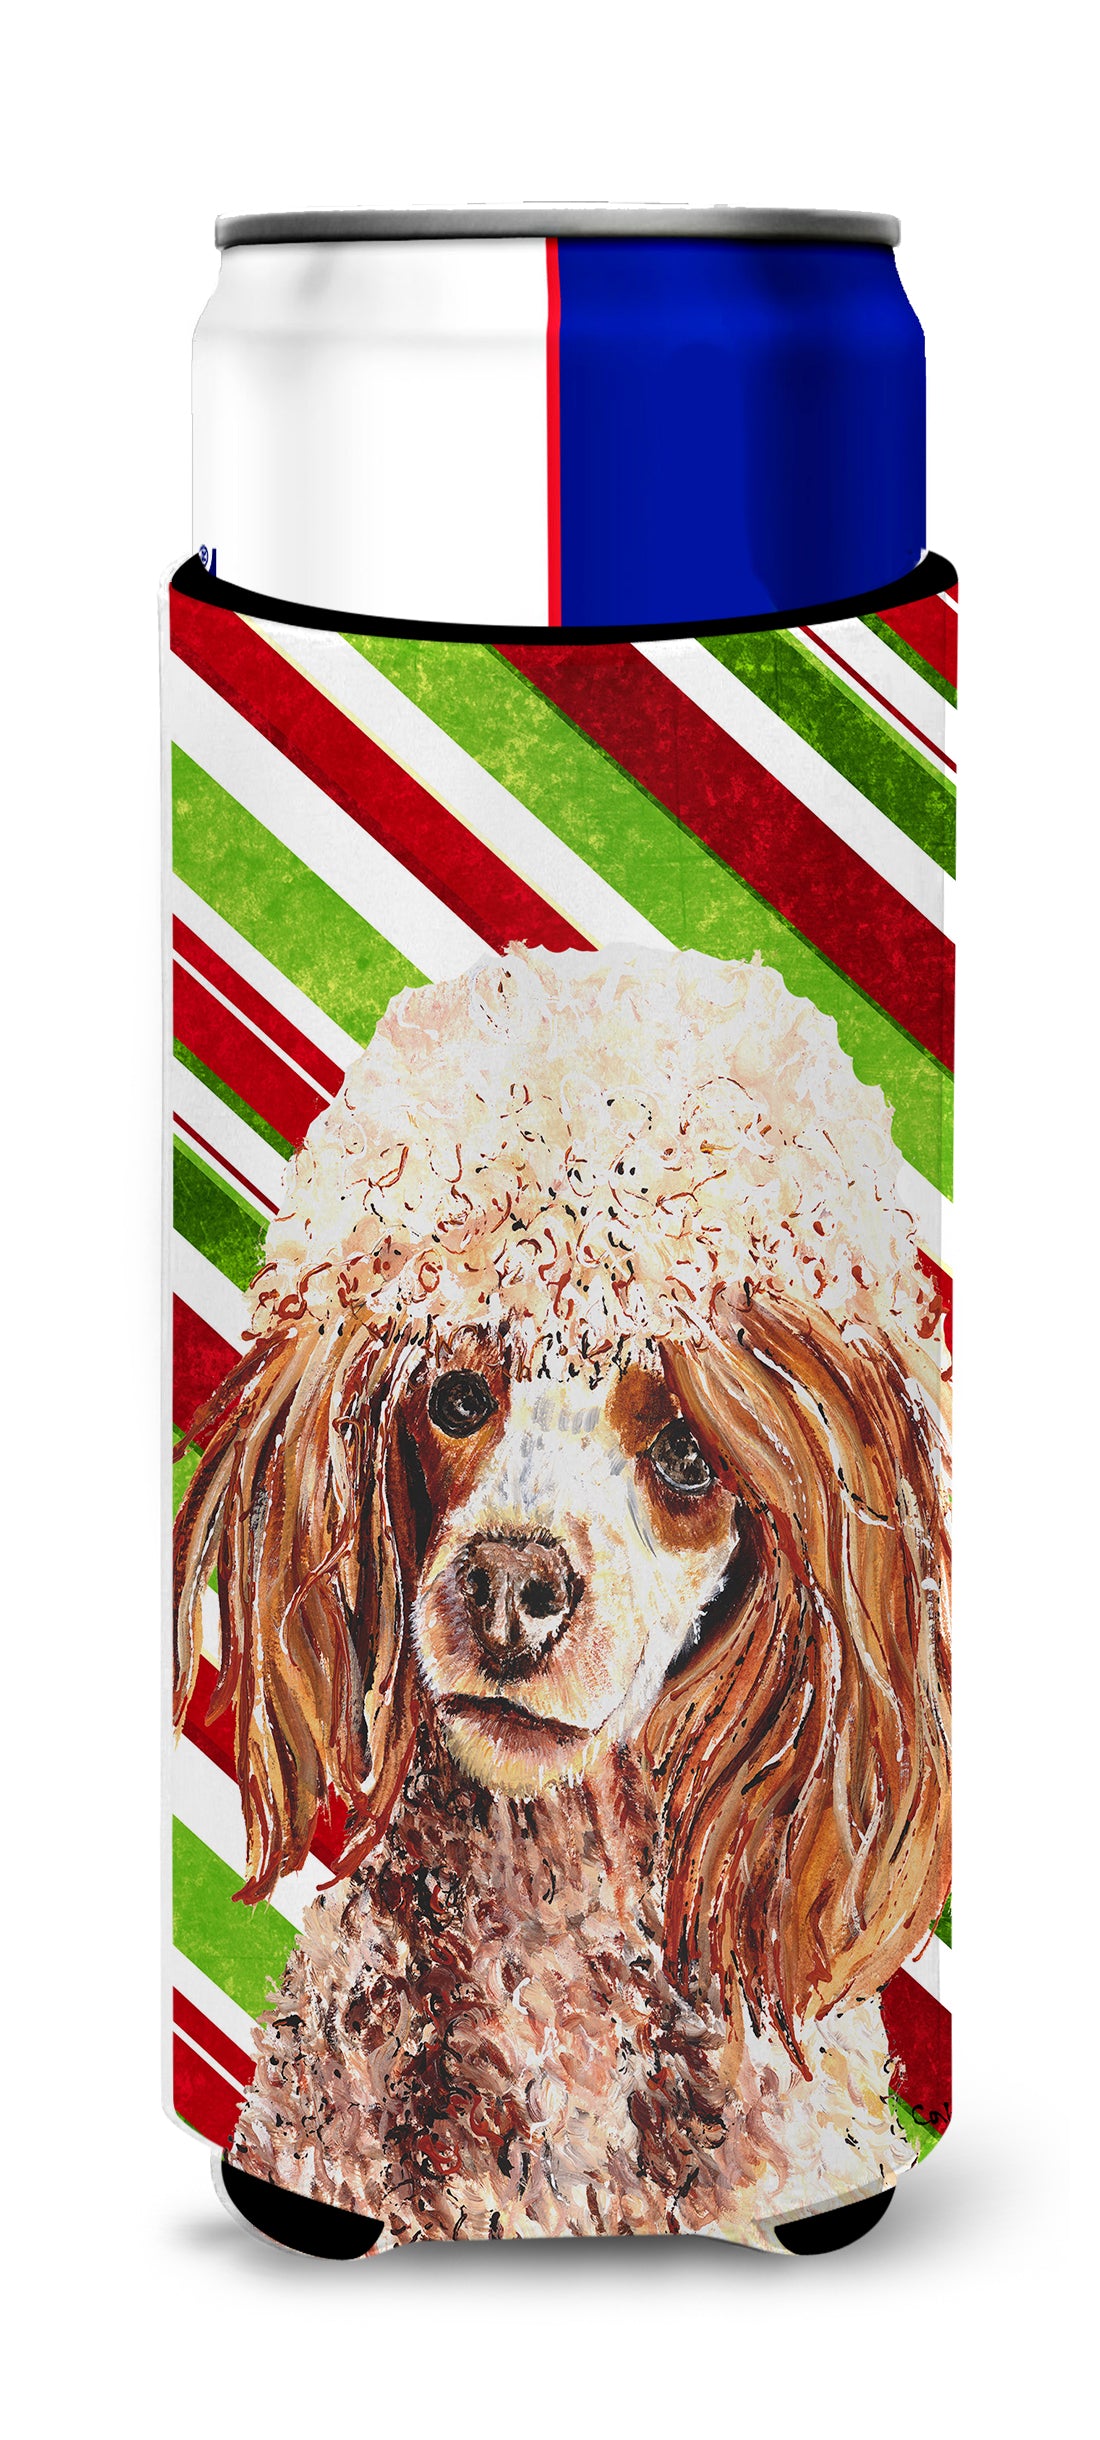 Red Miniature Poodle Candy Cane Christmas Ultra Beverage Insulators for slim cans SC9795MUK